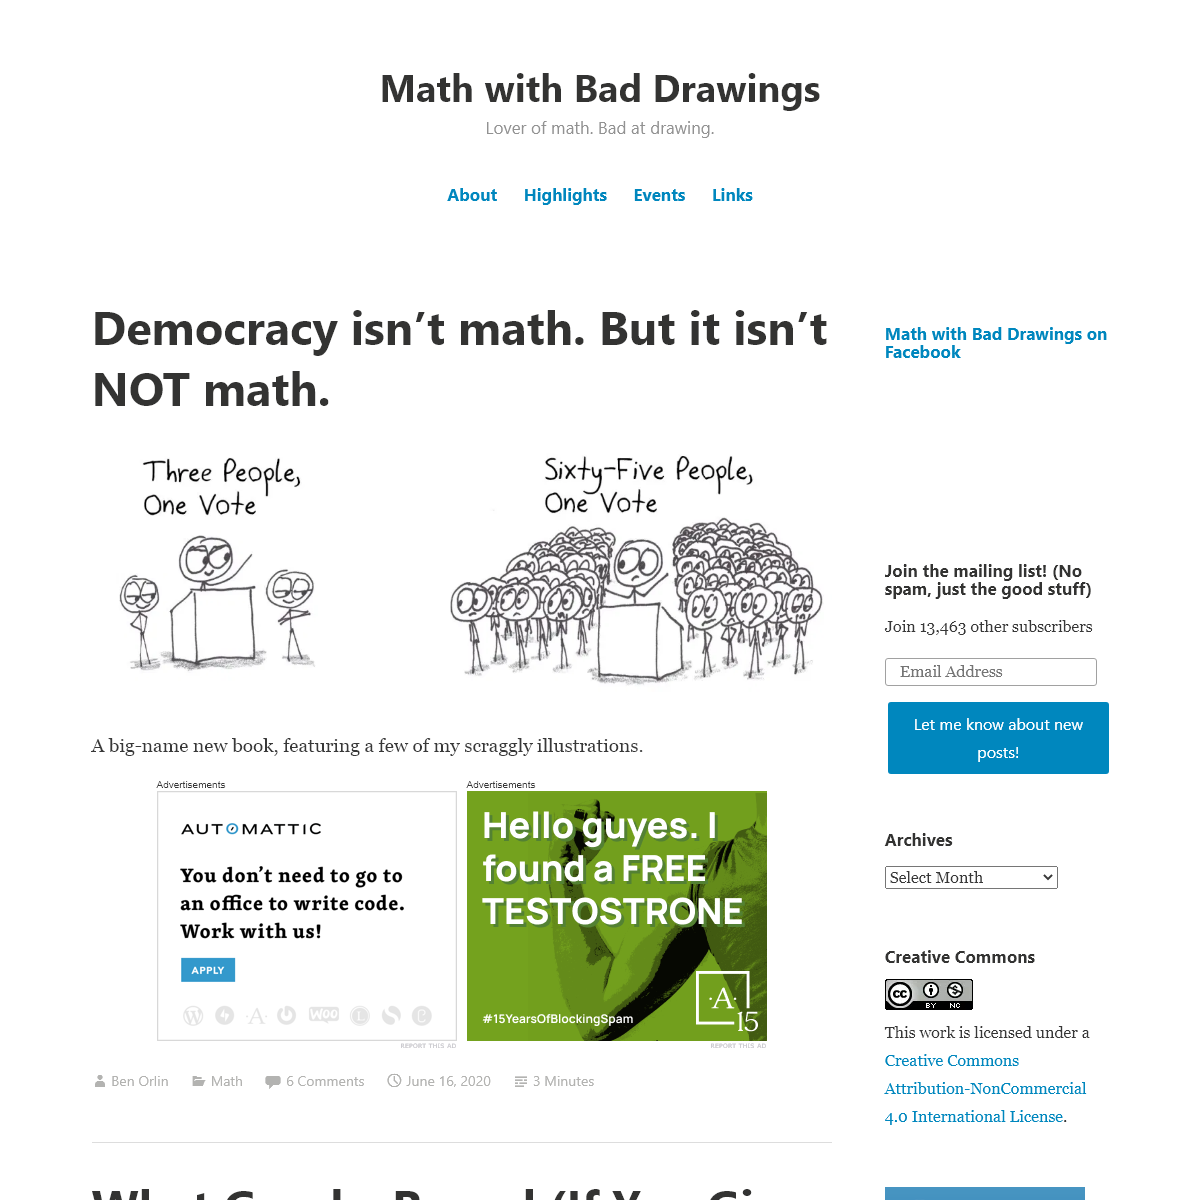 A complete backup of mathwithbaddrawings.com